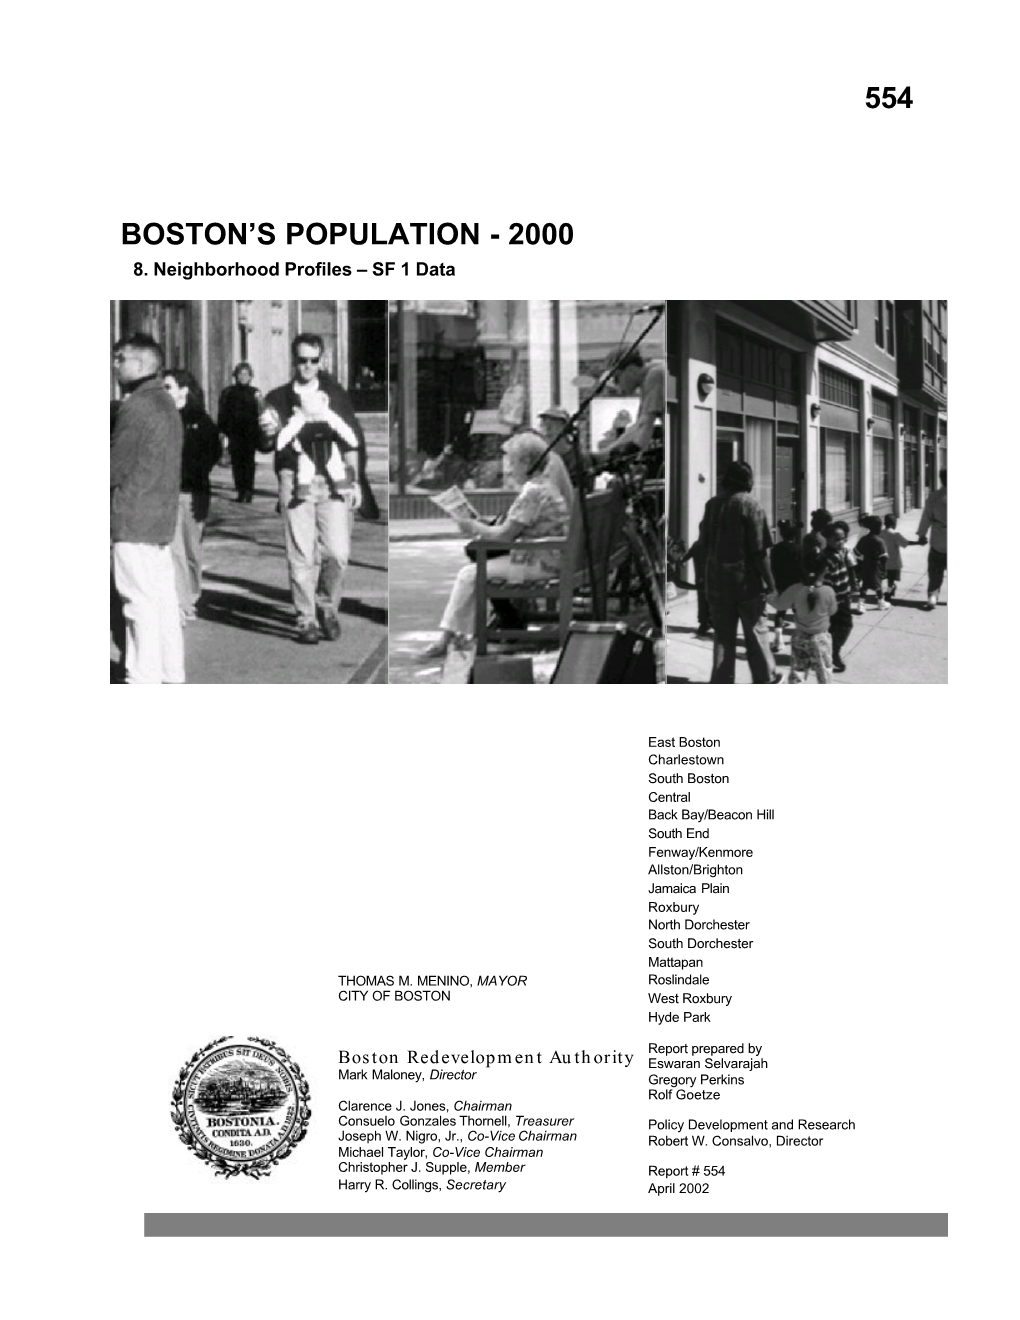 Boston's Population Grew by 14,859 People Or 2.59%, Making It One of Only Two Older Northern and Mid-Western Cities to Gain in Population Over Two Decades